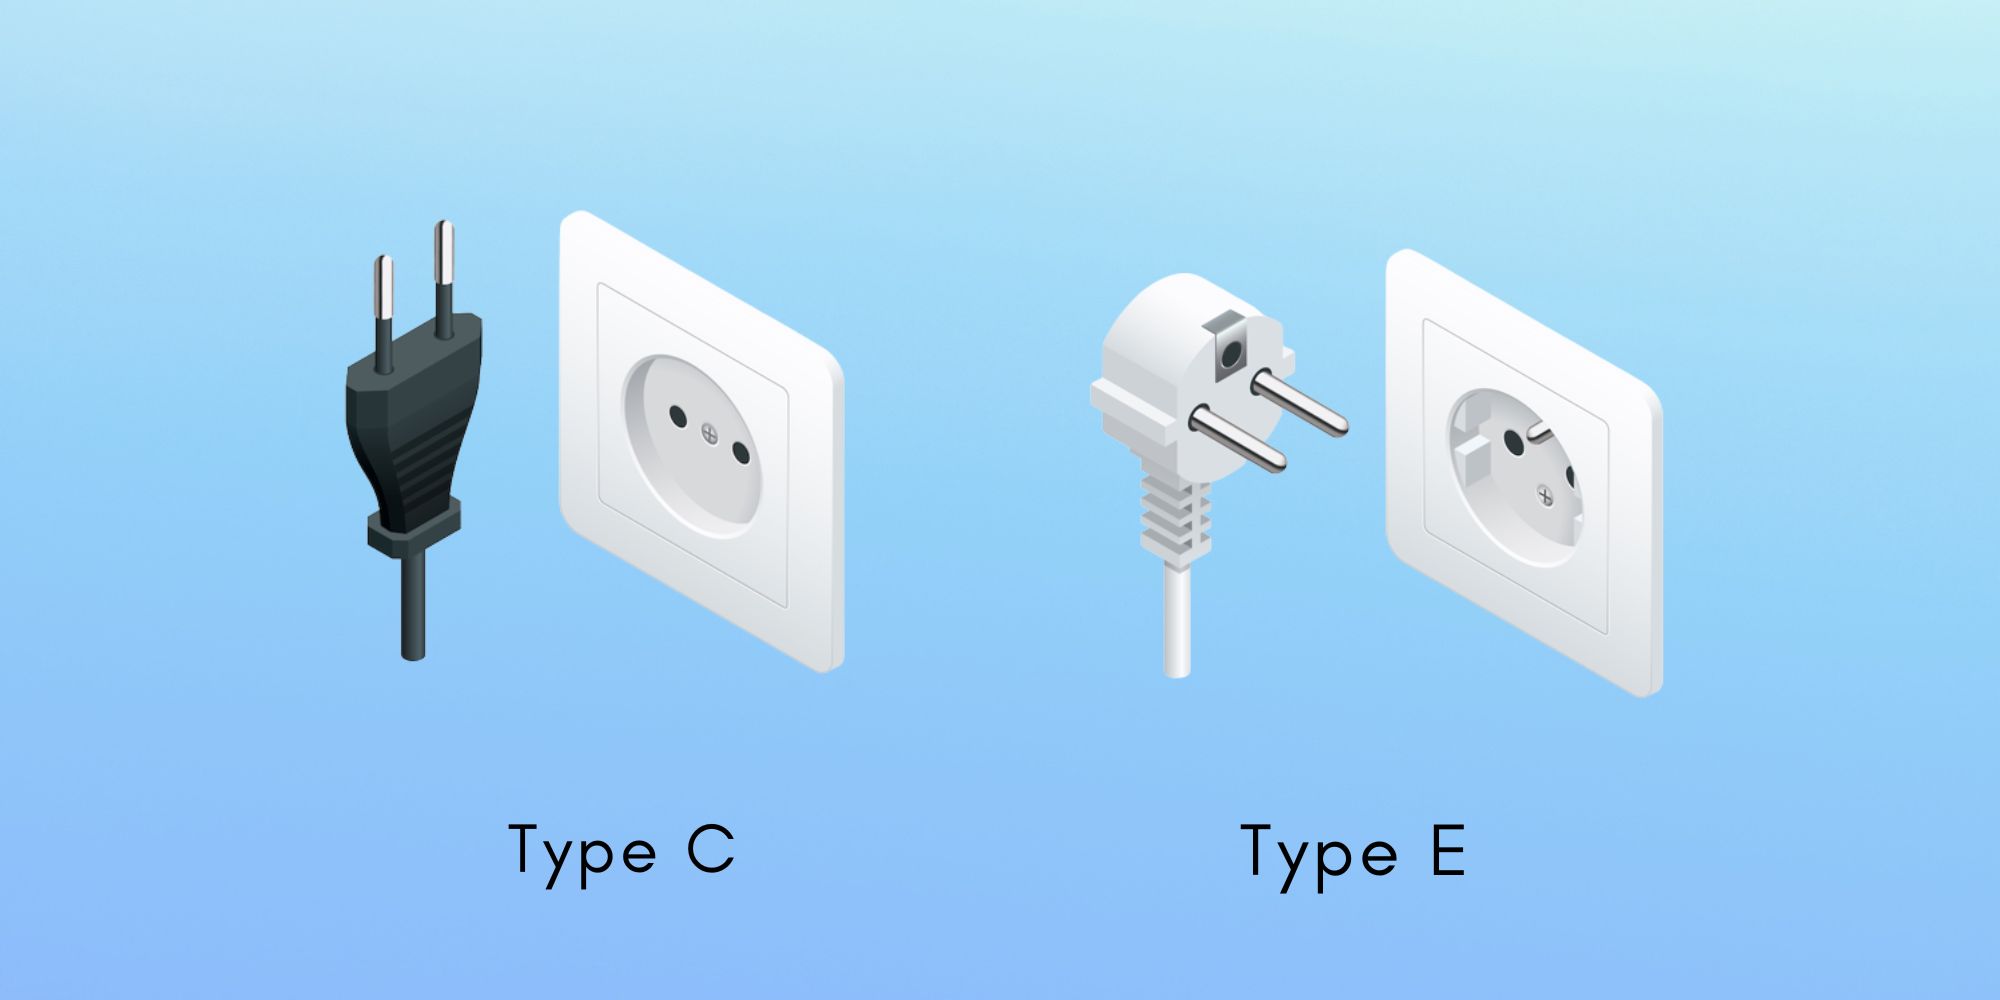 Belgium Power Plugs and Sockets: Type C and Type E
